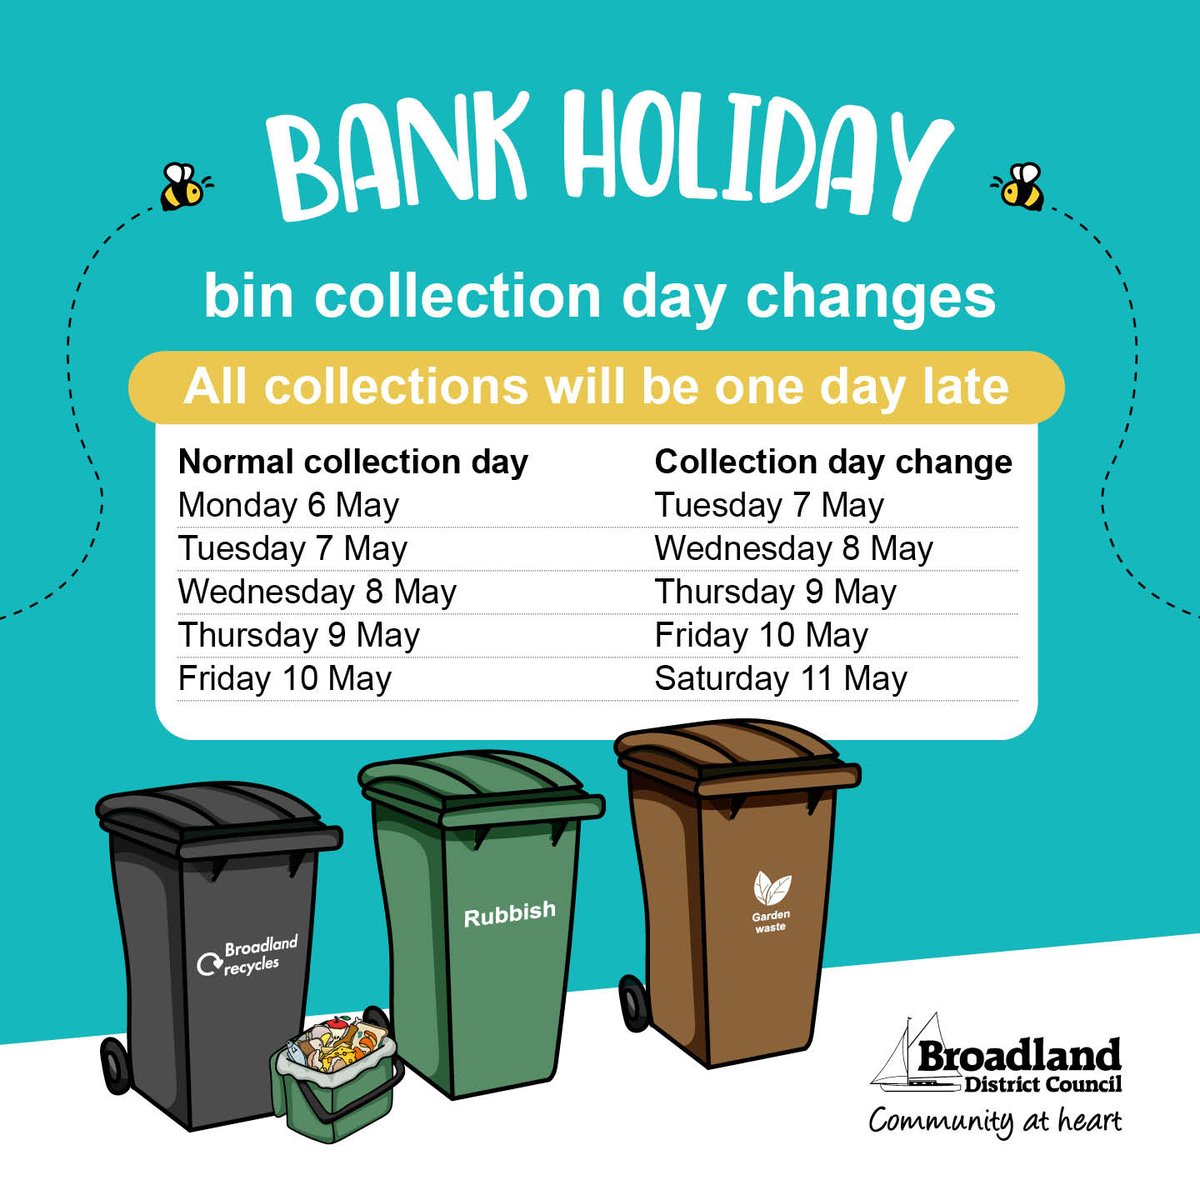 Rubbish, recycling, food waste and garden waste collections will be one day late next week due to the bank holiday. Please check the schedule for your collection day changes 👇 Keep up to date with your collections by downloading the Bin Collections app: ow.ly/Iu8z50RsfWJ